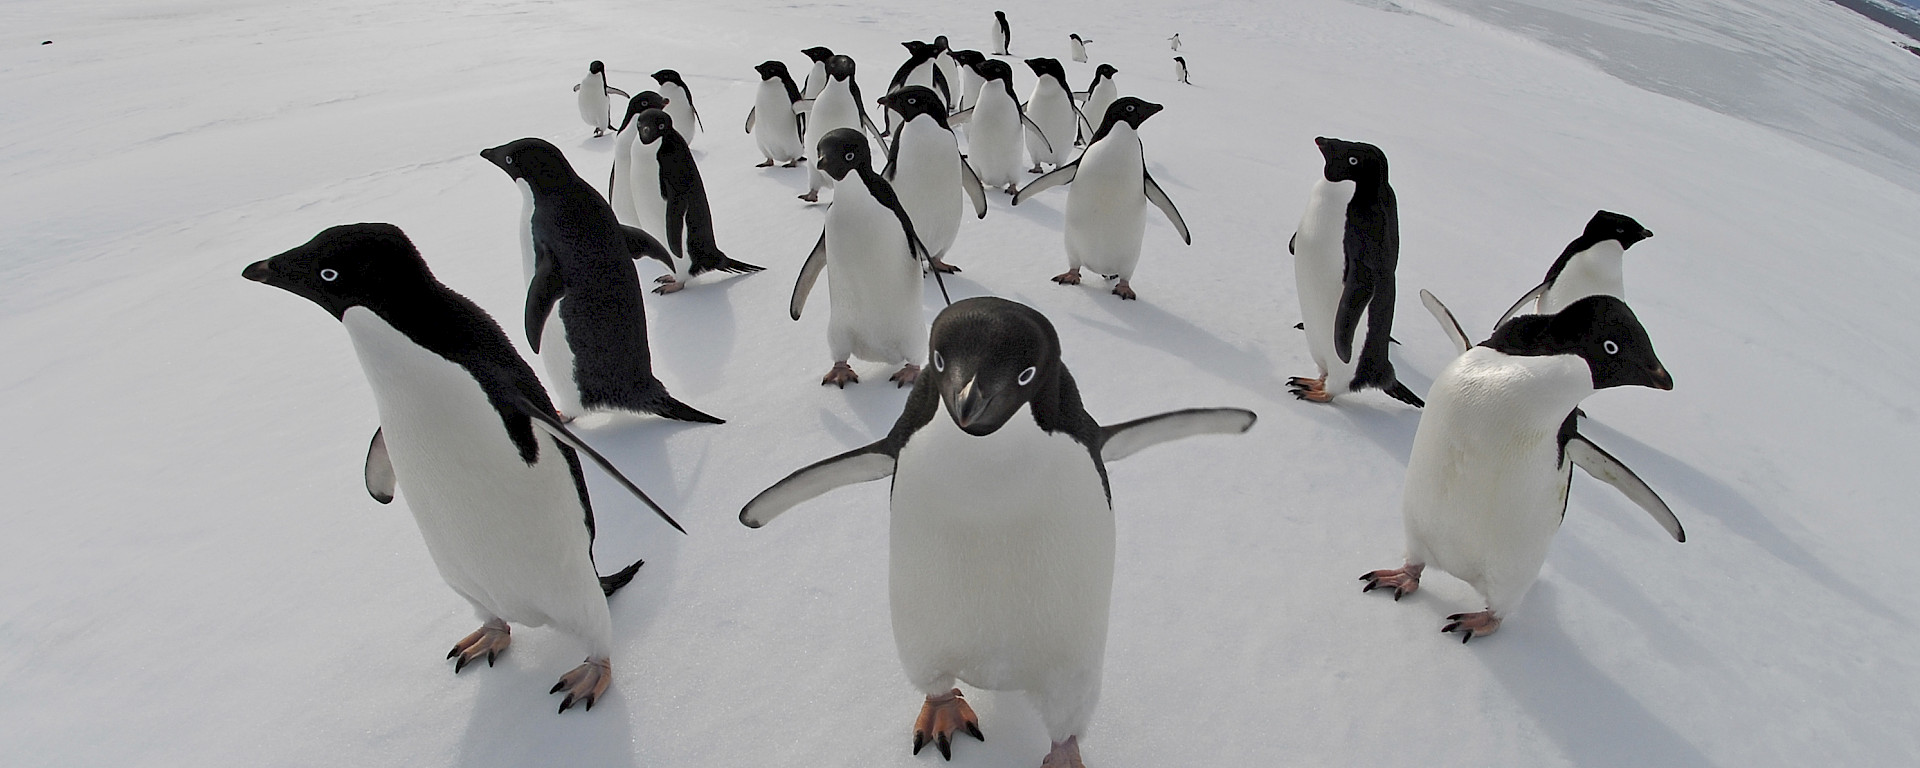 The concave lens shows the curve of the earth with a bunch of penguins waddling close to the camera.